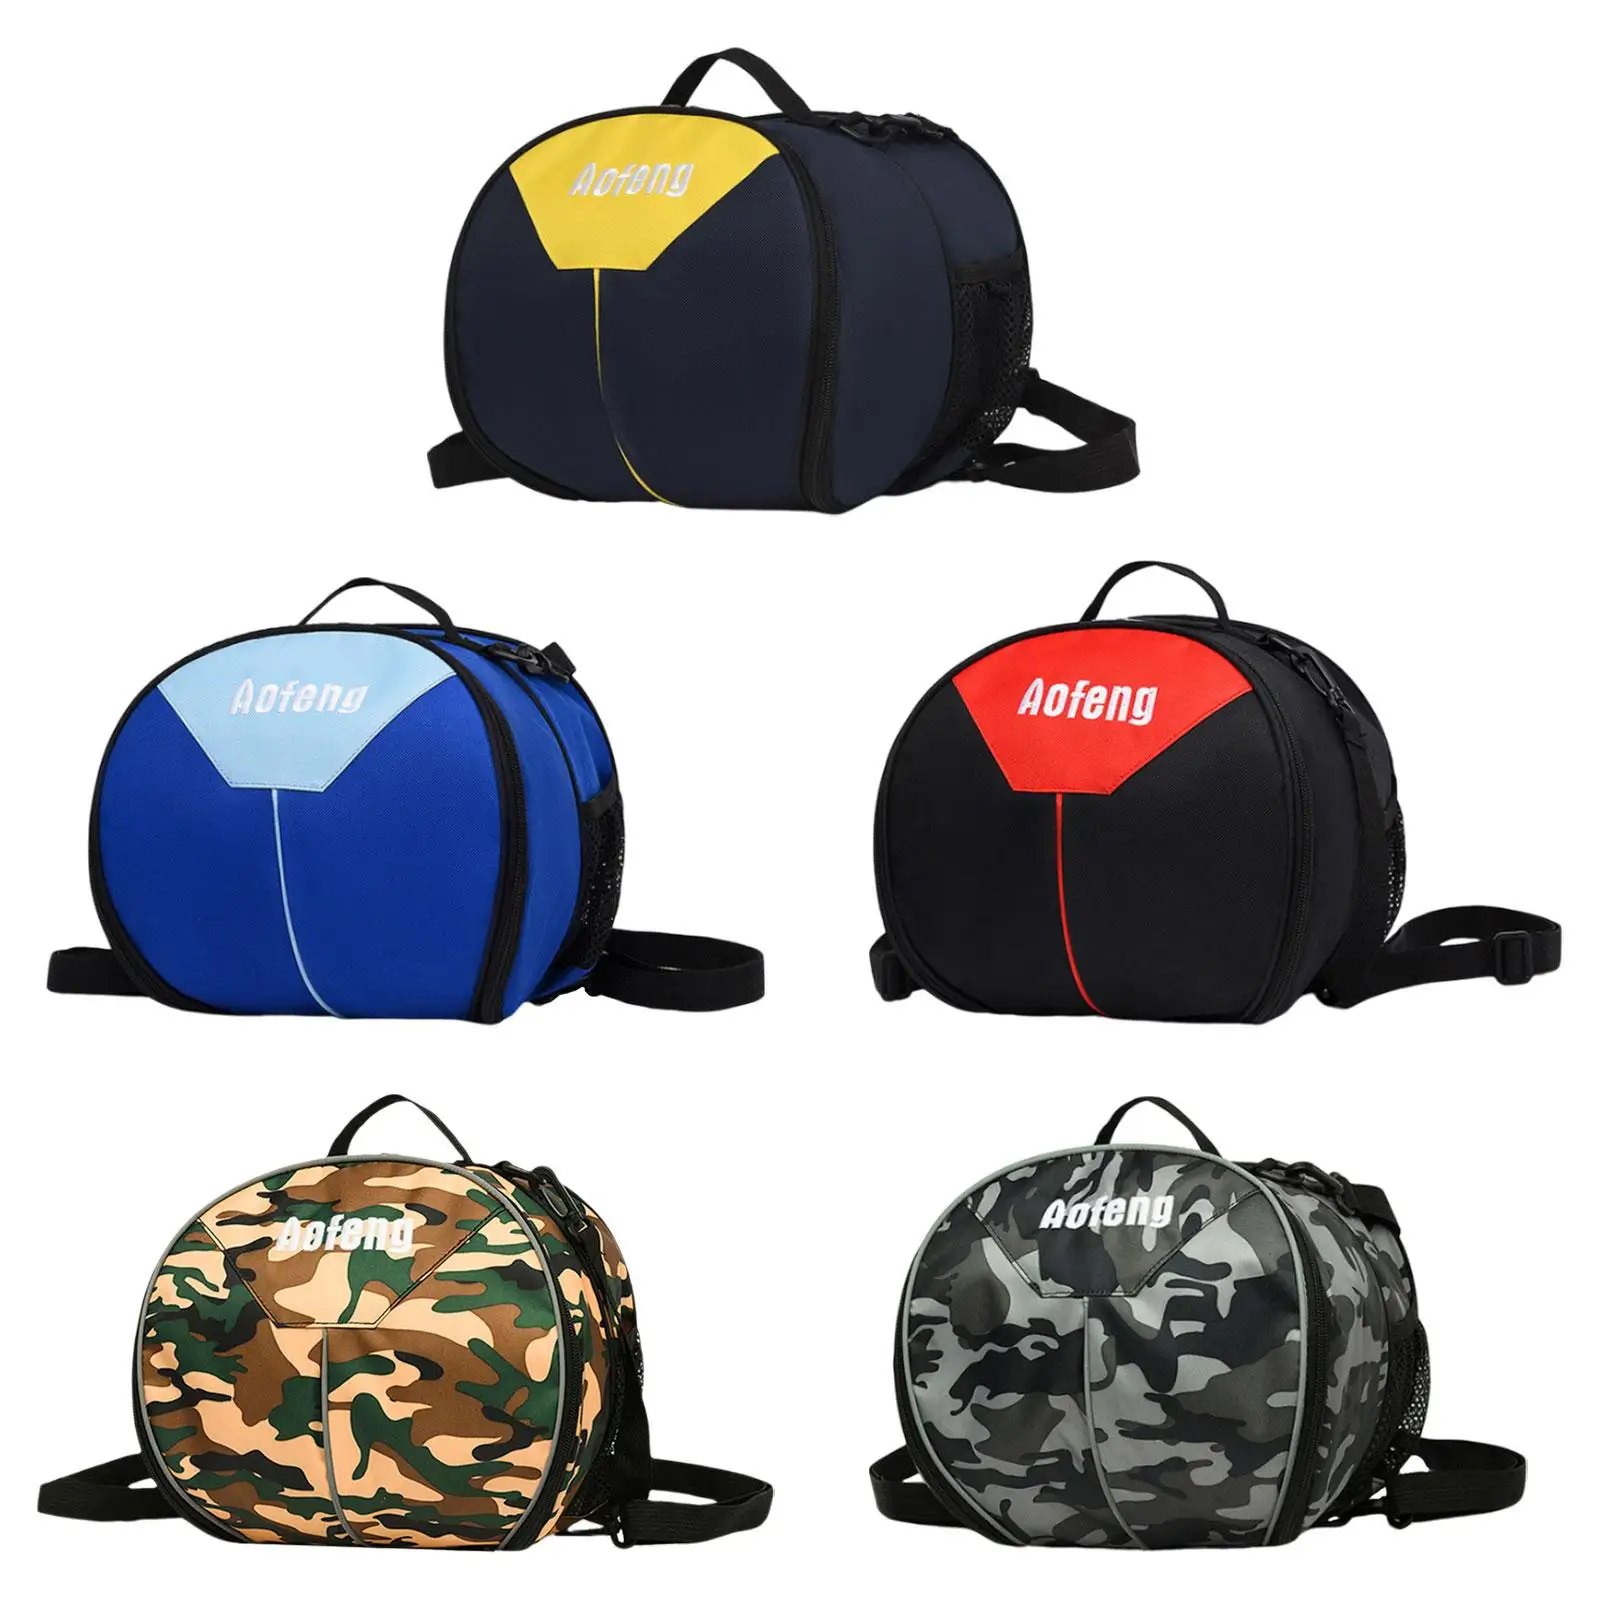 

Basketball Shoulder Bag with 2 Side Pockets Dual Zippers Closure Durable Soccer Storage Bag for Softball Football Volleyball